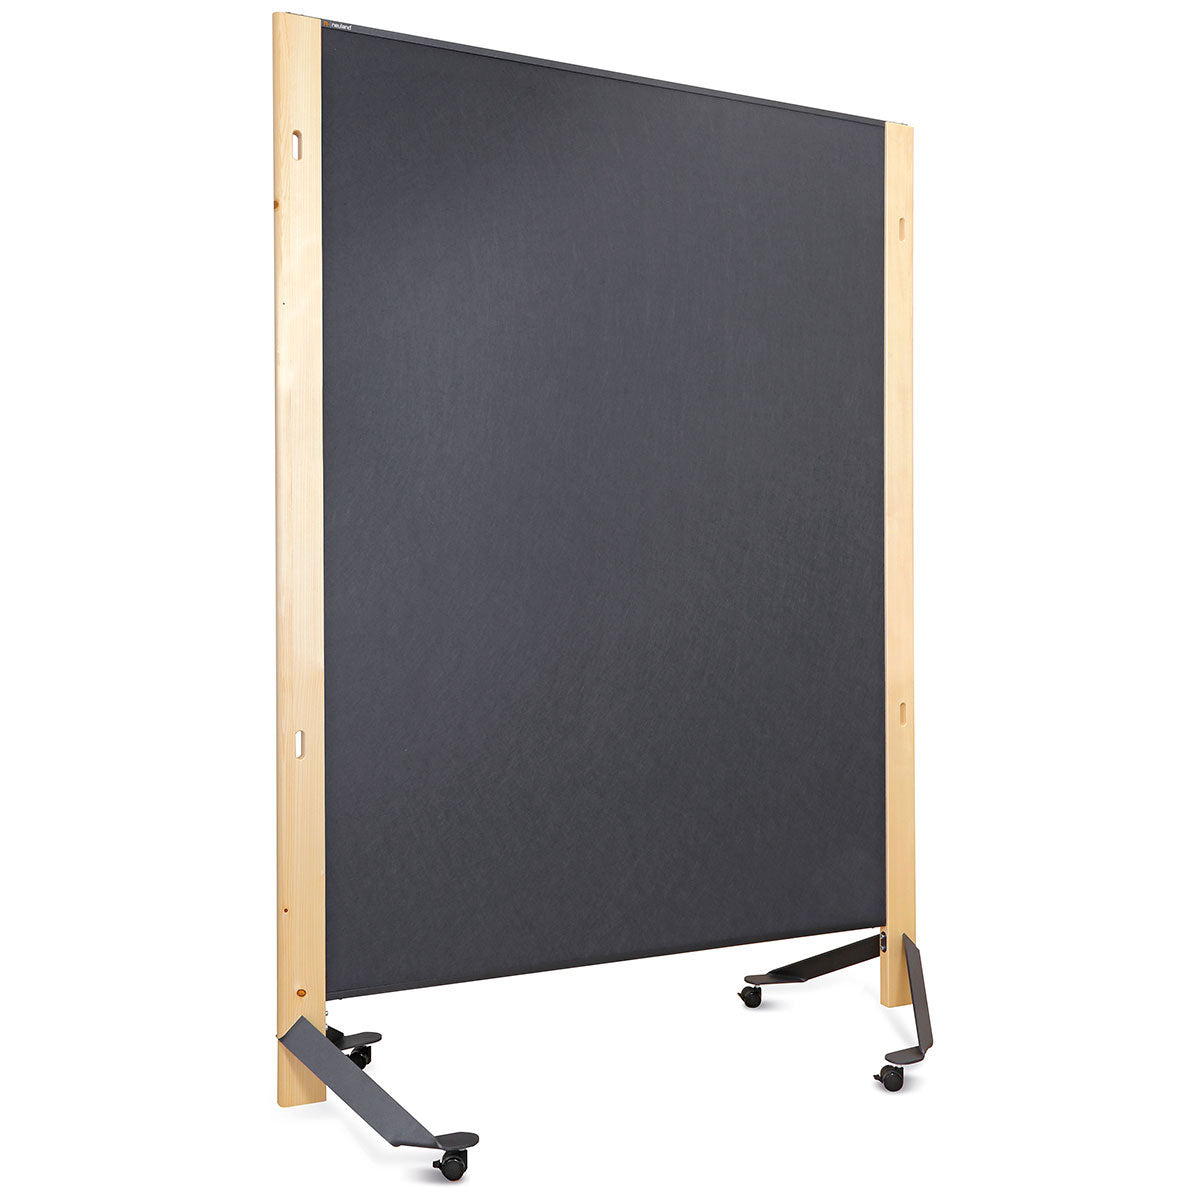 The Duo Slide wall: anthracite